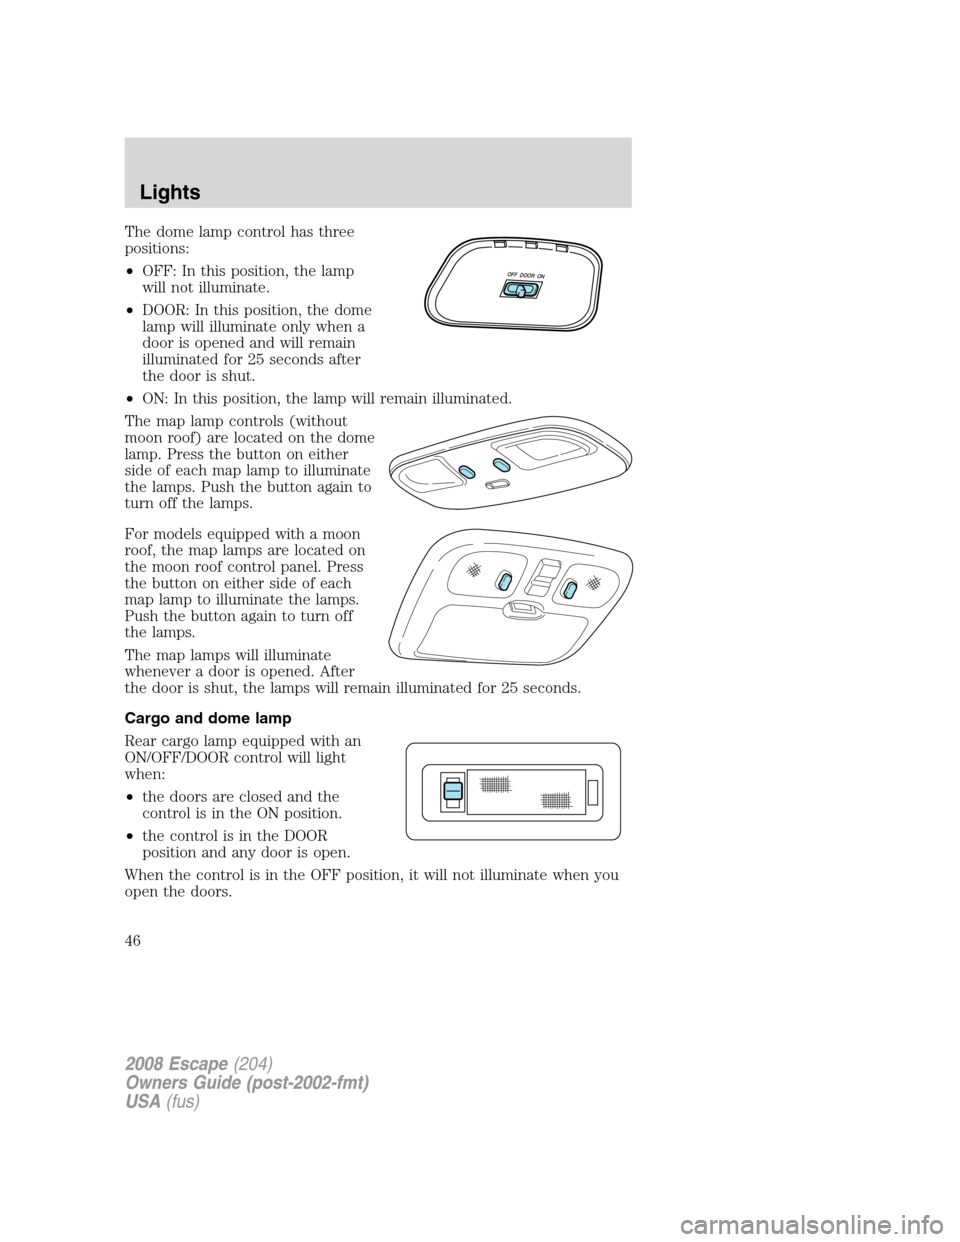 FORD ESCAPE 2008 2.G Service Manual The dome lamp control has three
positions:
•OFF: In this position, the lamp
will not illuminate.
•DOOR: In this position, the dome
lamp will illuminate only when a
door is opened and will remain
i